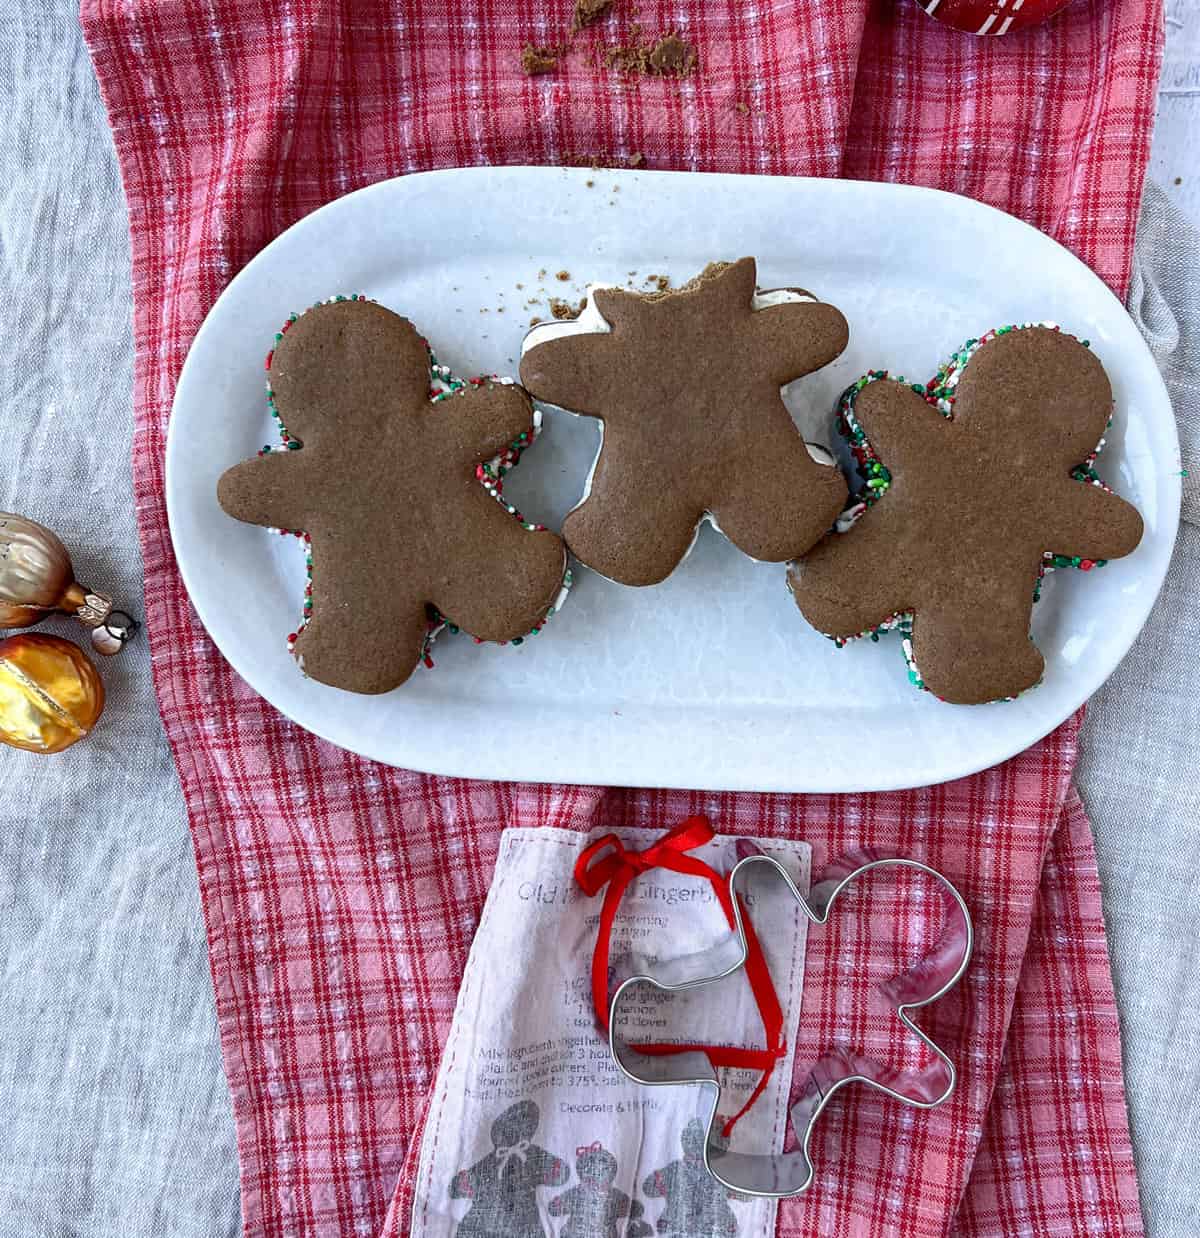 Three gingerbread men ice cream sandwiches, one with a missing head.